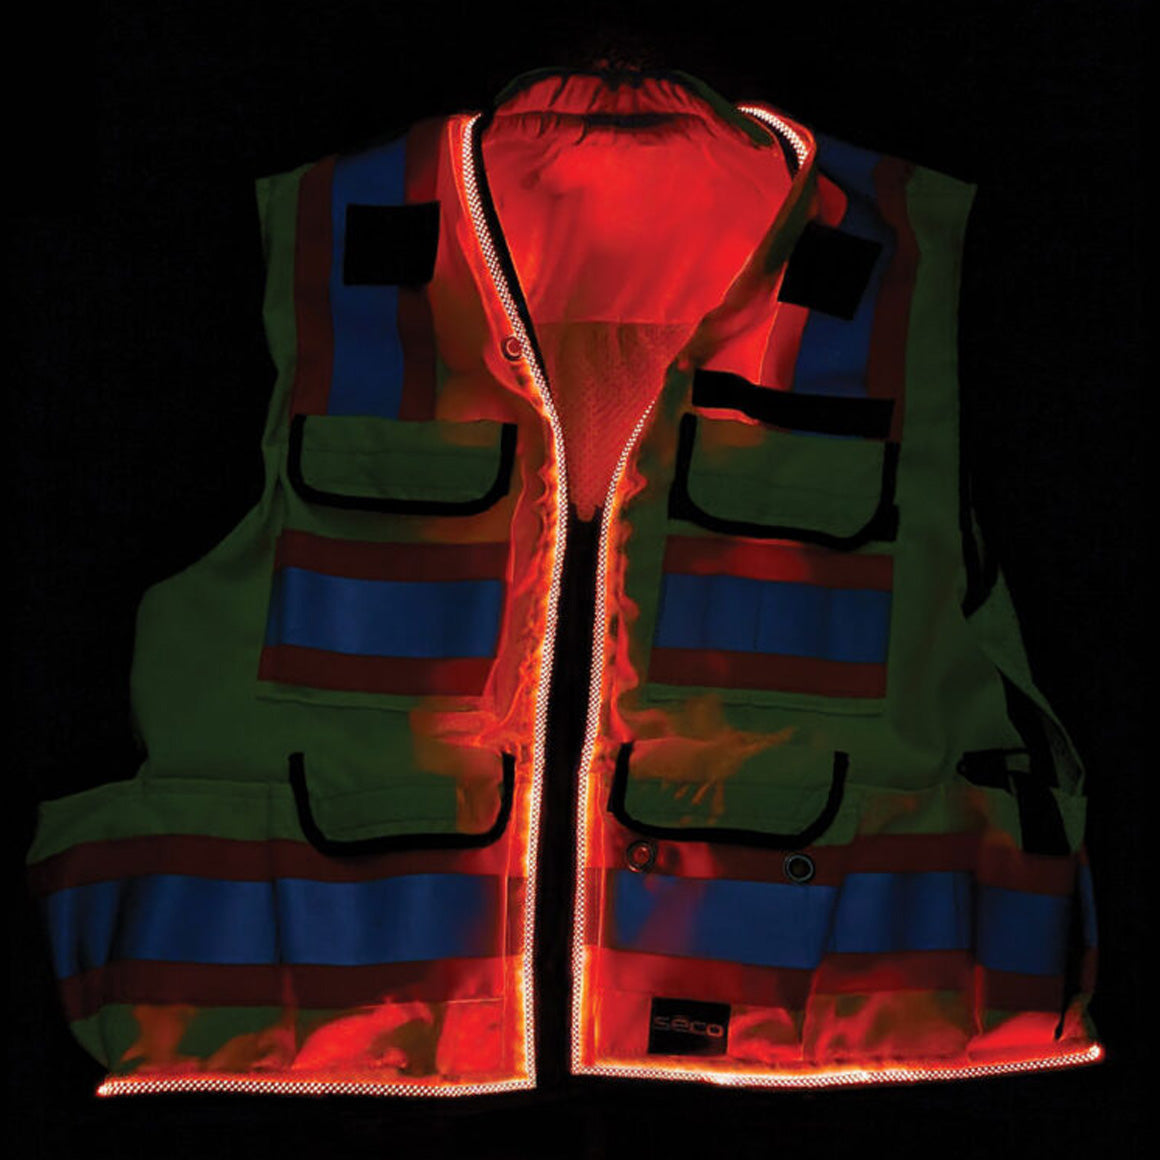 SECO 8265 Class 2 Safety Utility Vest - LED Lighted